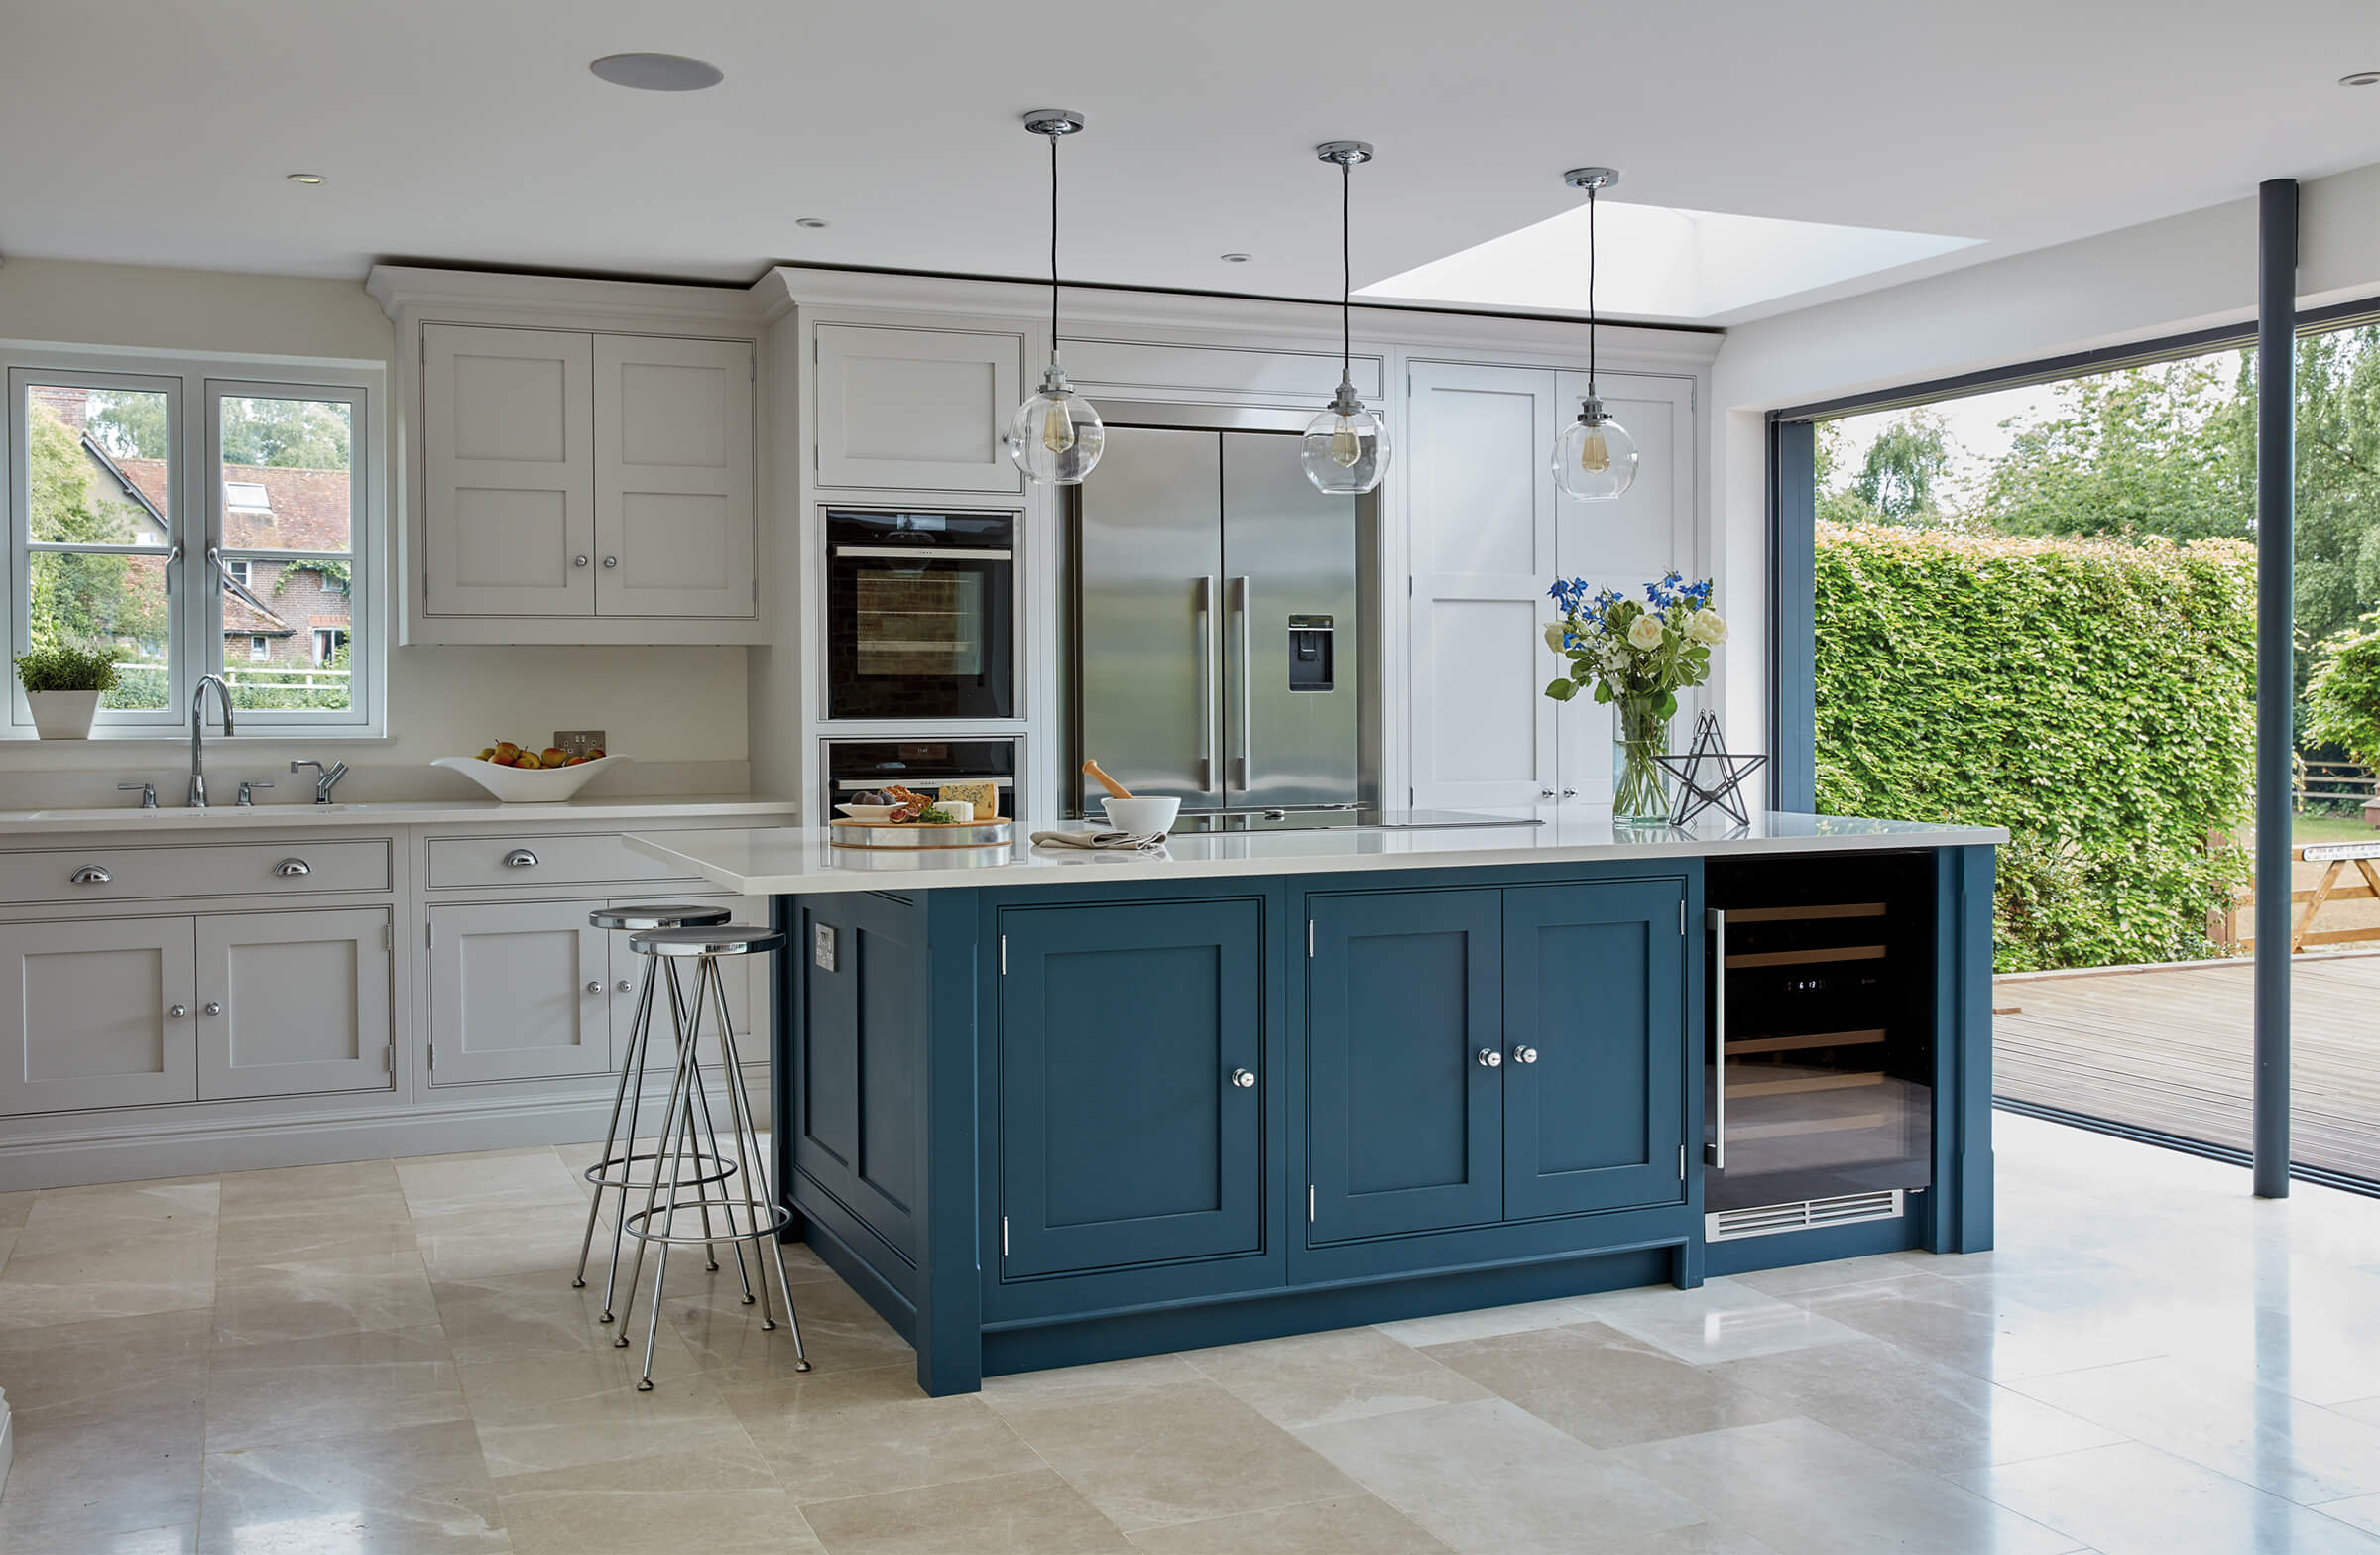 Tom howley Tansy and Navy blue kitchen